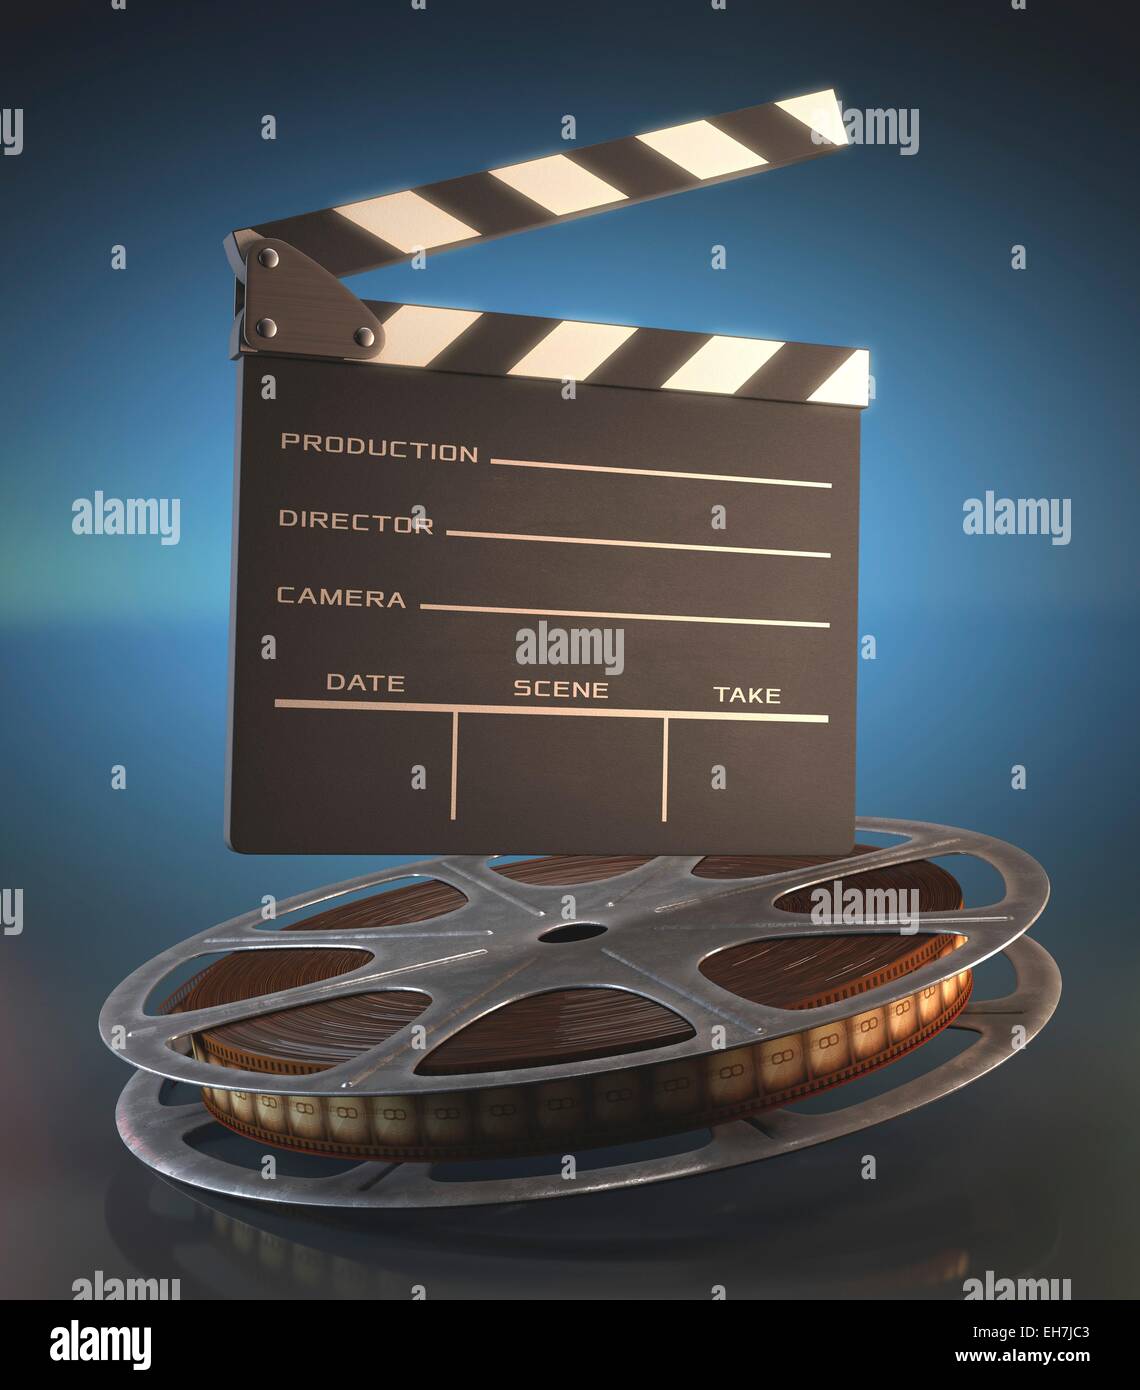 Movie reel and clapperboard, illustration Stock Photo